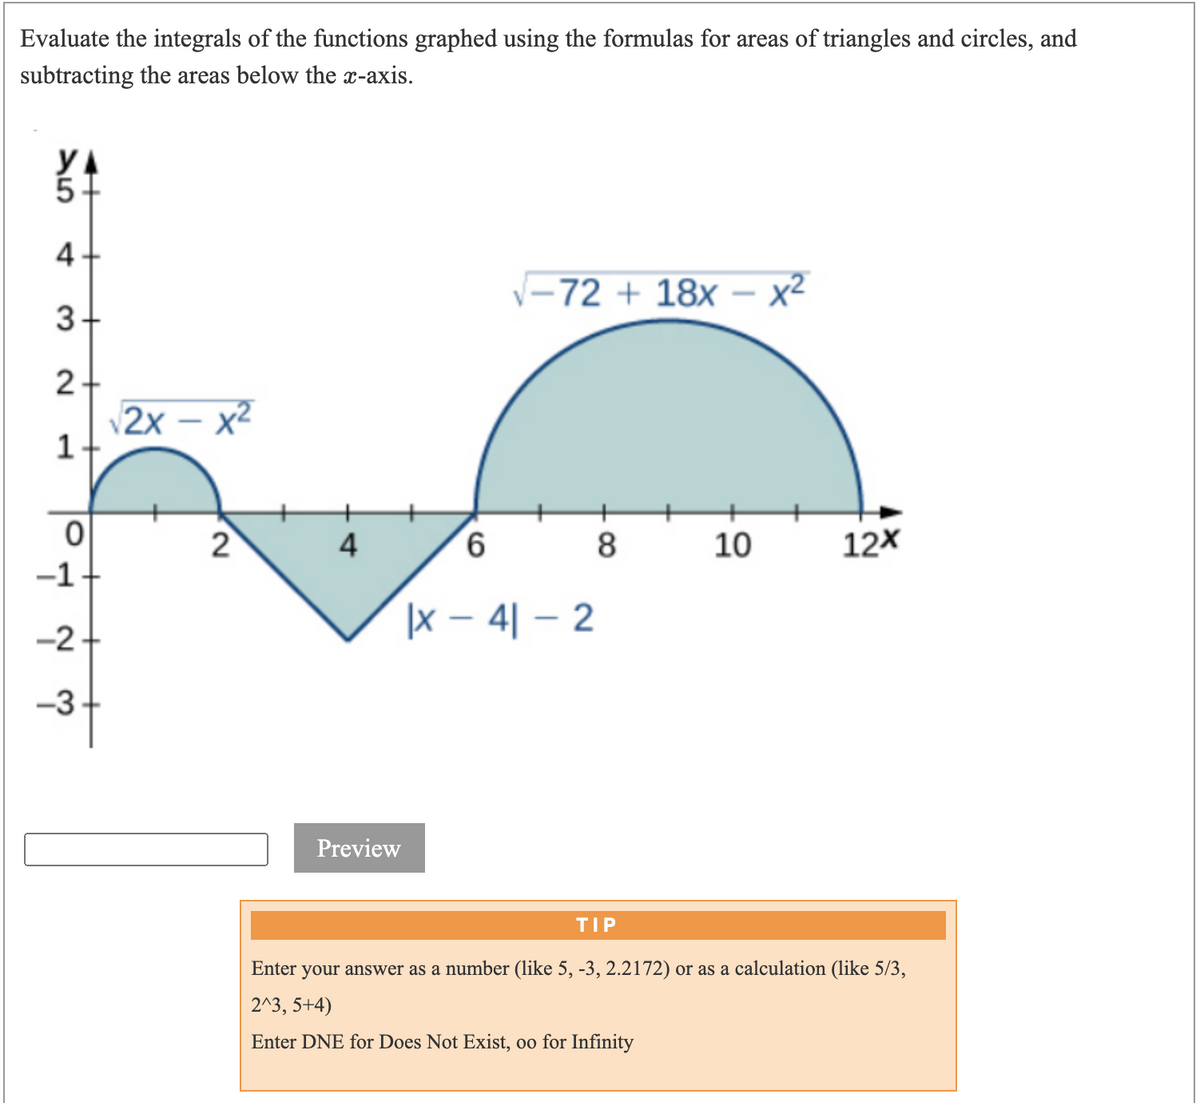 Evaluate the integrals of the functions graphed using the formulas for areas of triangles and circles, and
subtracting the areas below the x-axis.
YA
4
|-72 + 18x – x²
3+
2.
\2x – x²
1
-
2
4
9.
8
10
12X
-1
|x – 4| – 2
-2+
-3
Preview
TIP
Enter your answer as a number (like 5, -3, 2.2172) or as a calculation (like 5/3,
2^3, 5+4)
Enter DNE for Does Not Exist, oo for Infinity
6,
